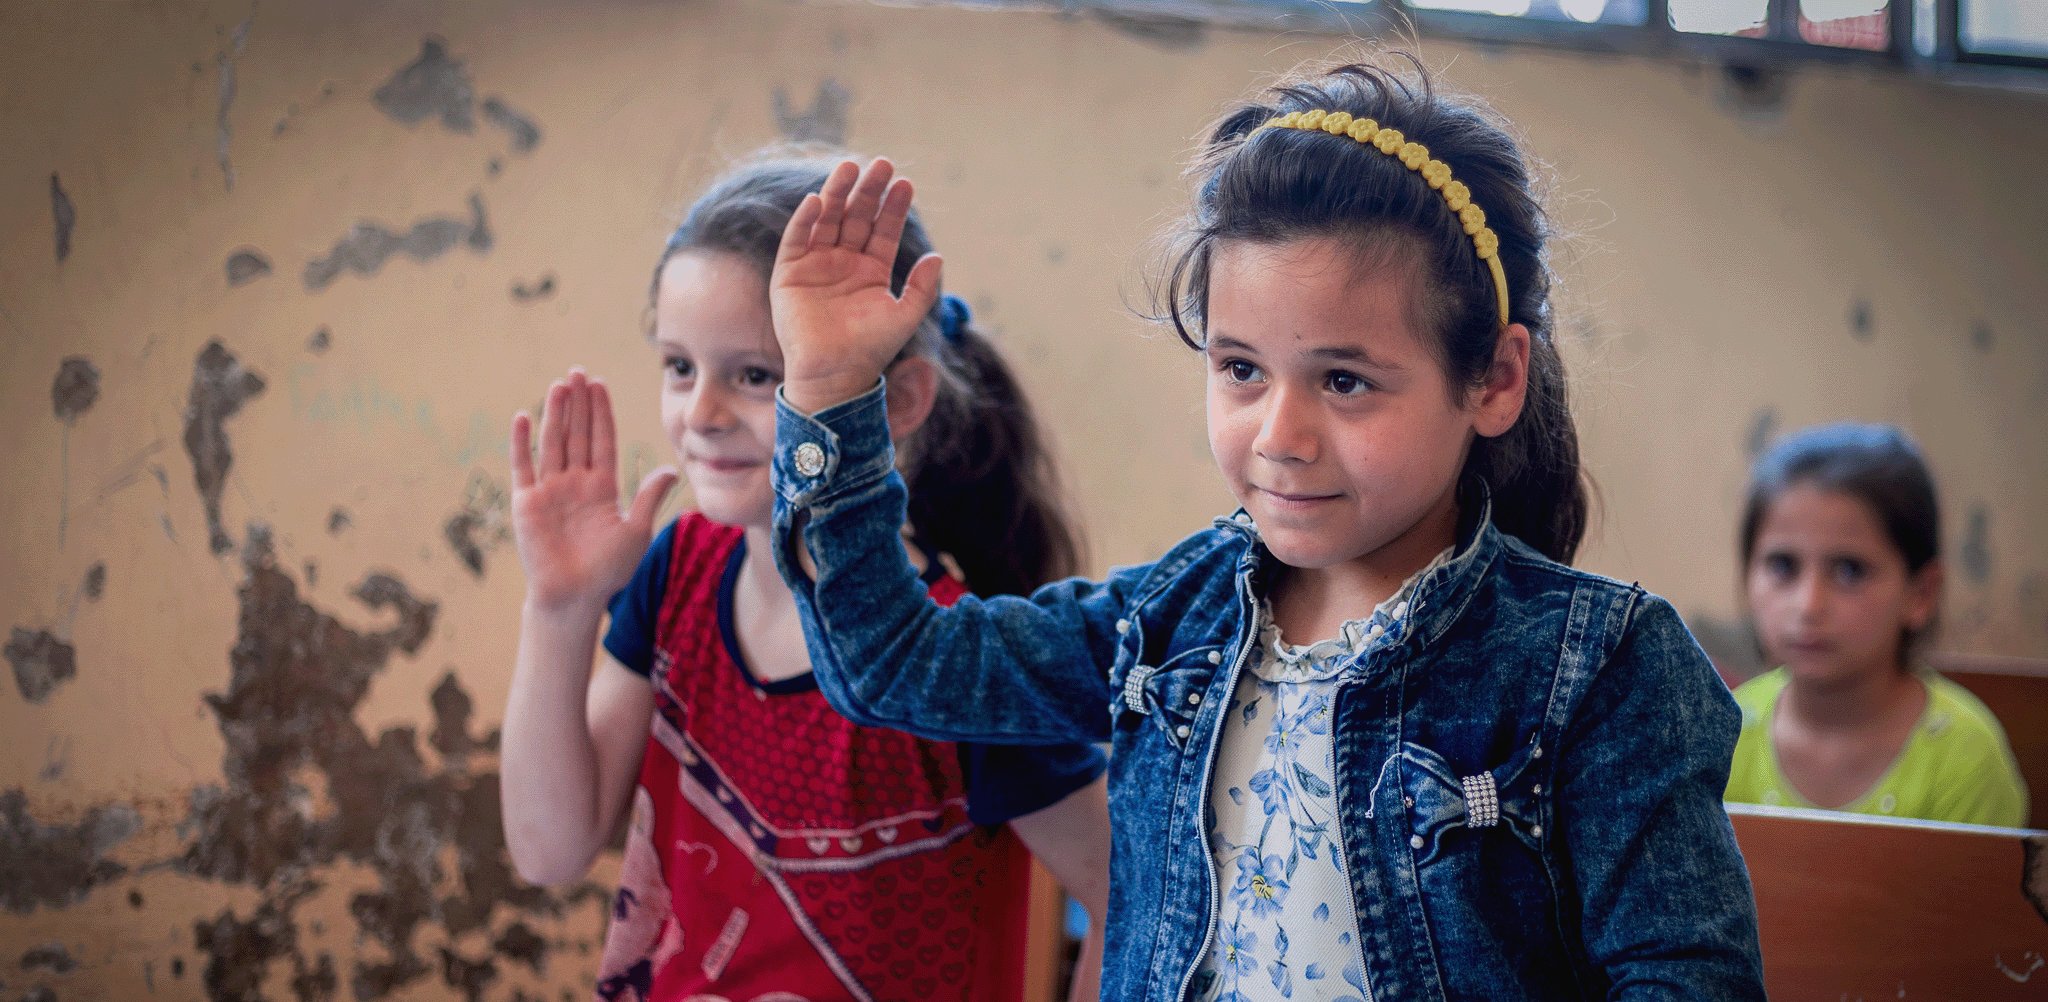 “I learnt how to add and subtract. I will learn more, because I want to become a doctor when I grow up,” said Fatima, 8, during a UNICEF -supported remedial class in Aleppo city, Syria, on 10 June 2023. She attended the classes at Samir Abu Hersh school together with some 200 children.